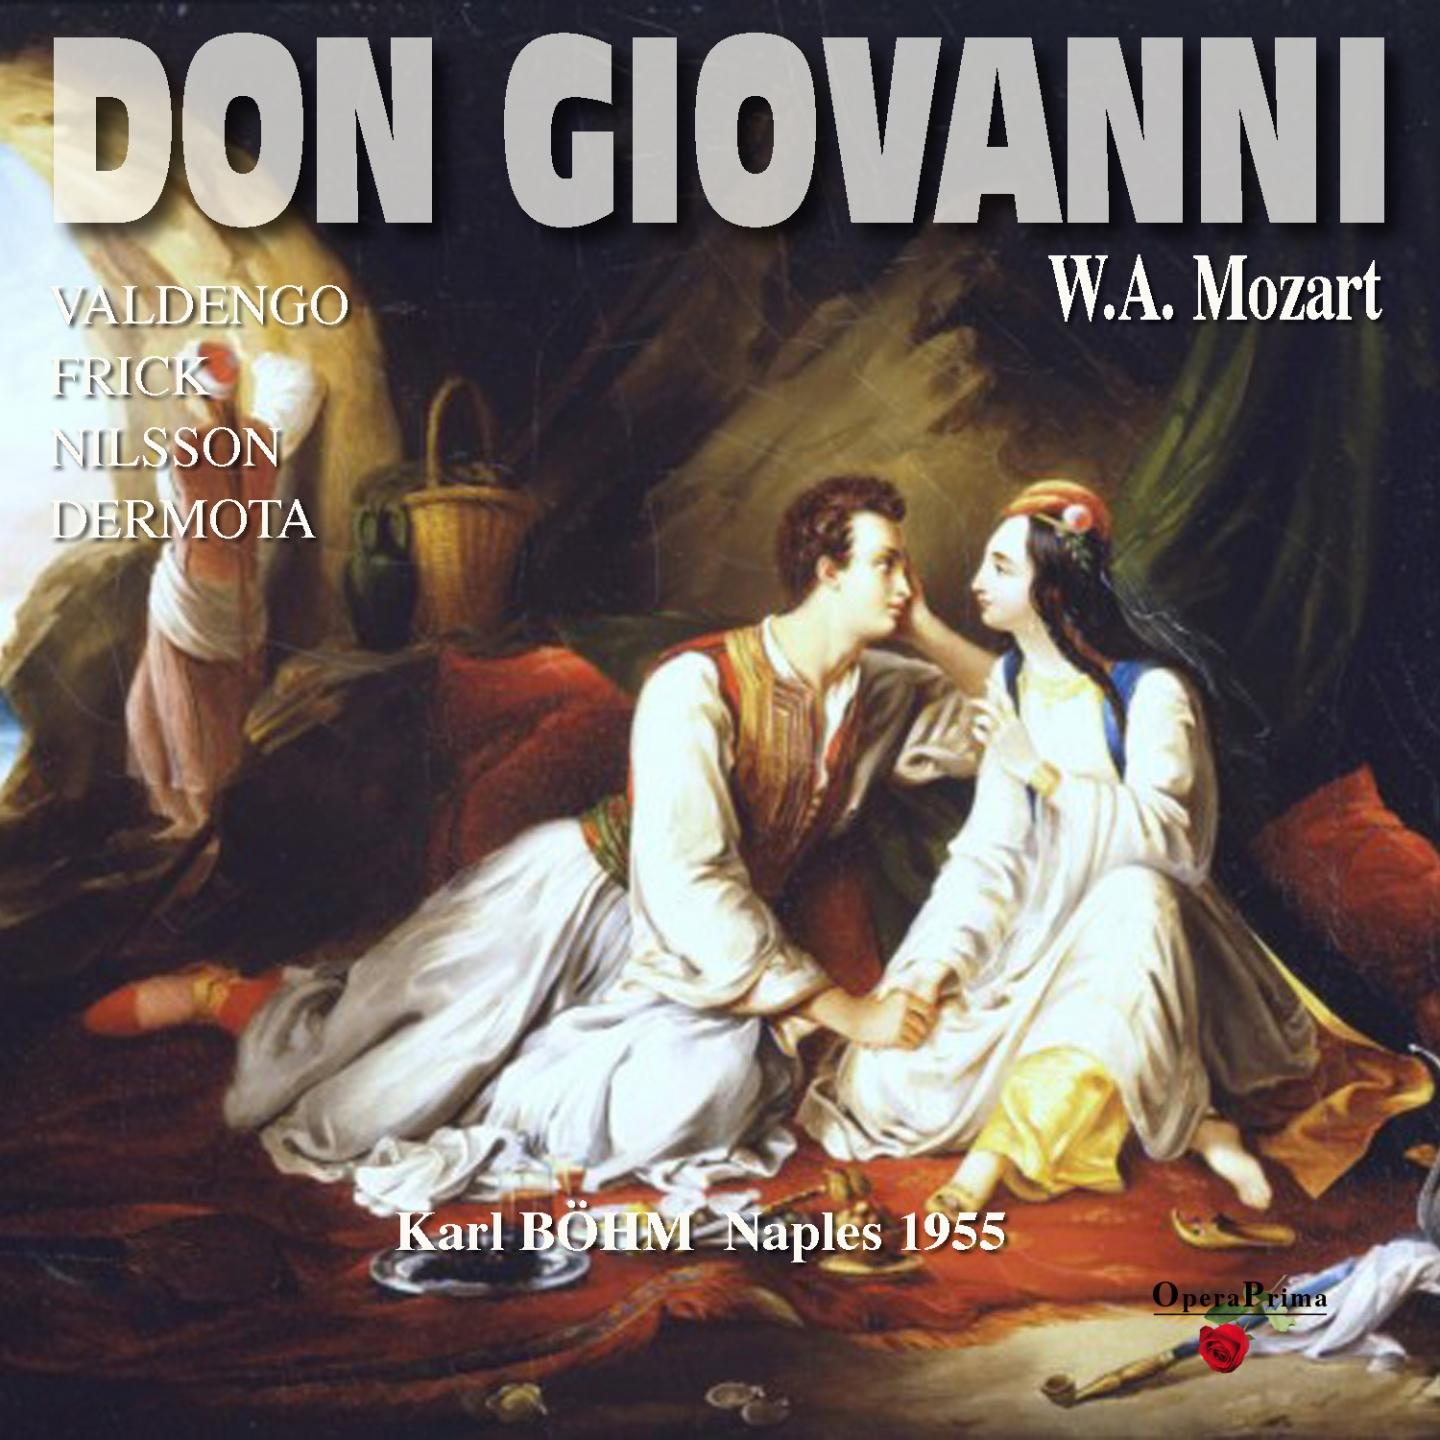 Don Giovanni: Act I - Overture